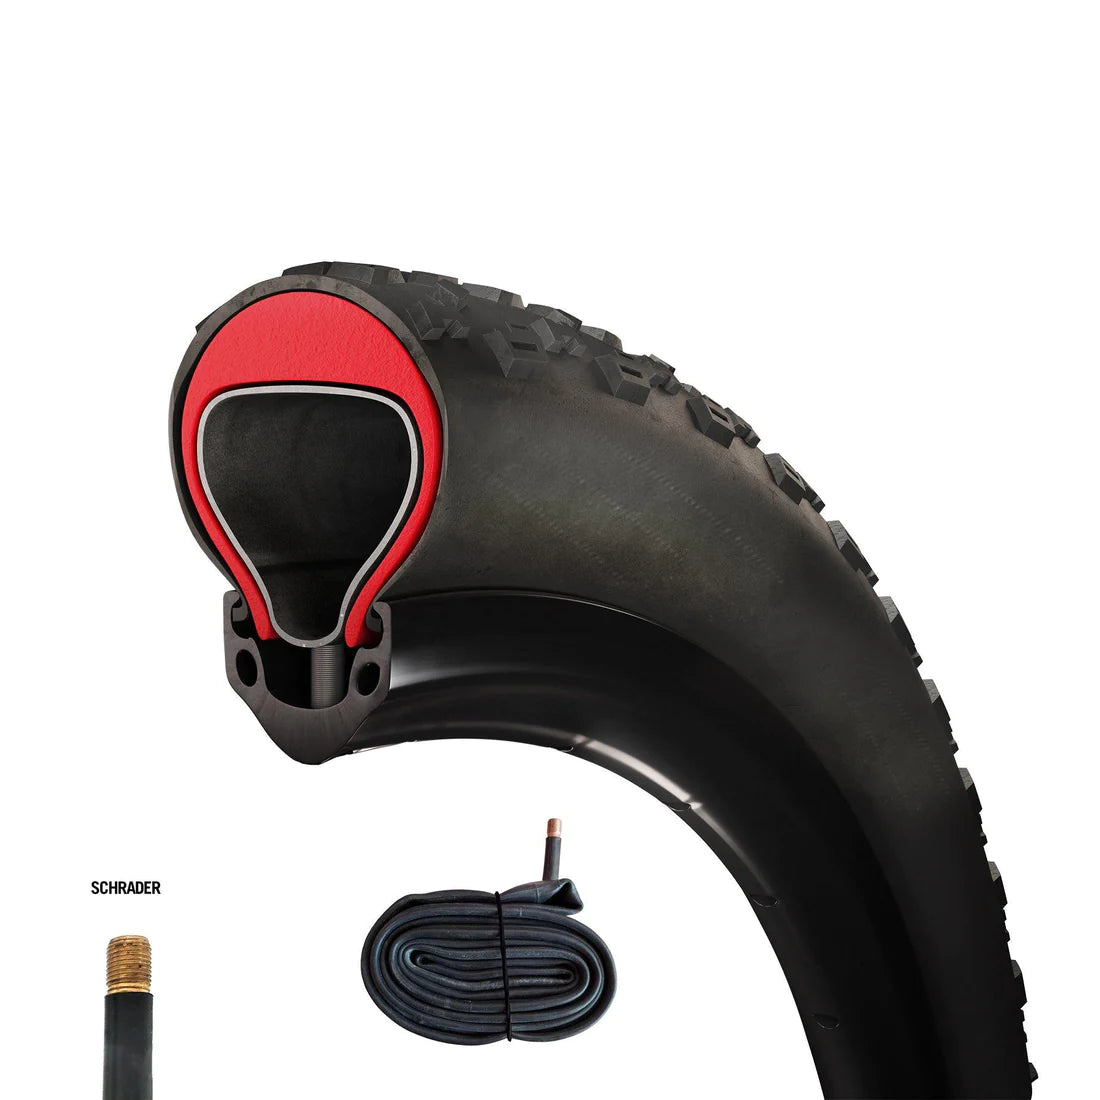 Tannus Armour Bike Flat Protection Inserts